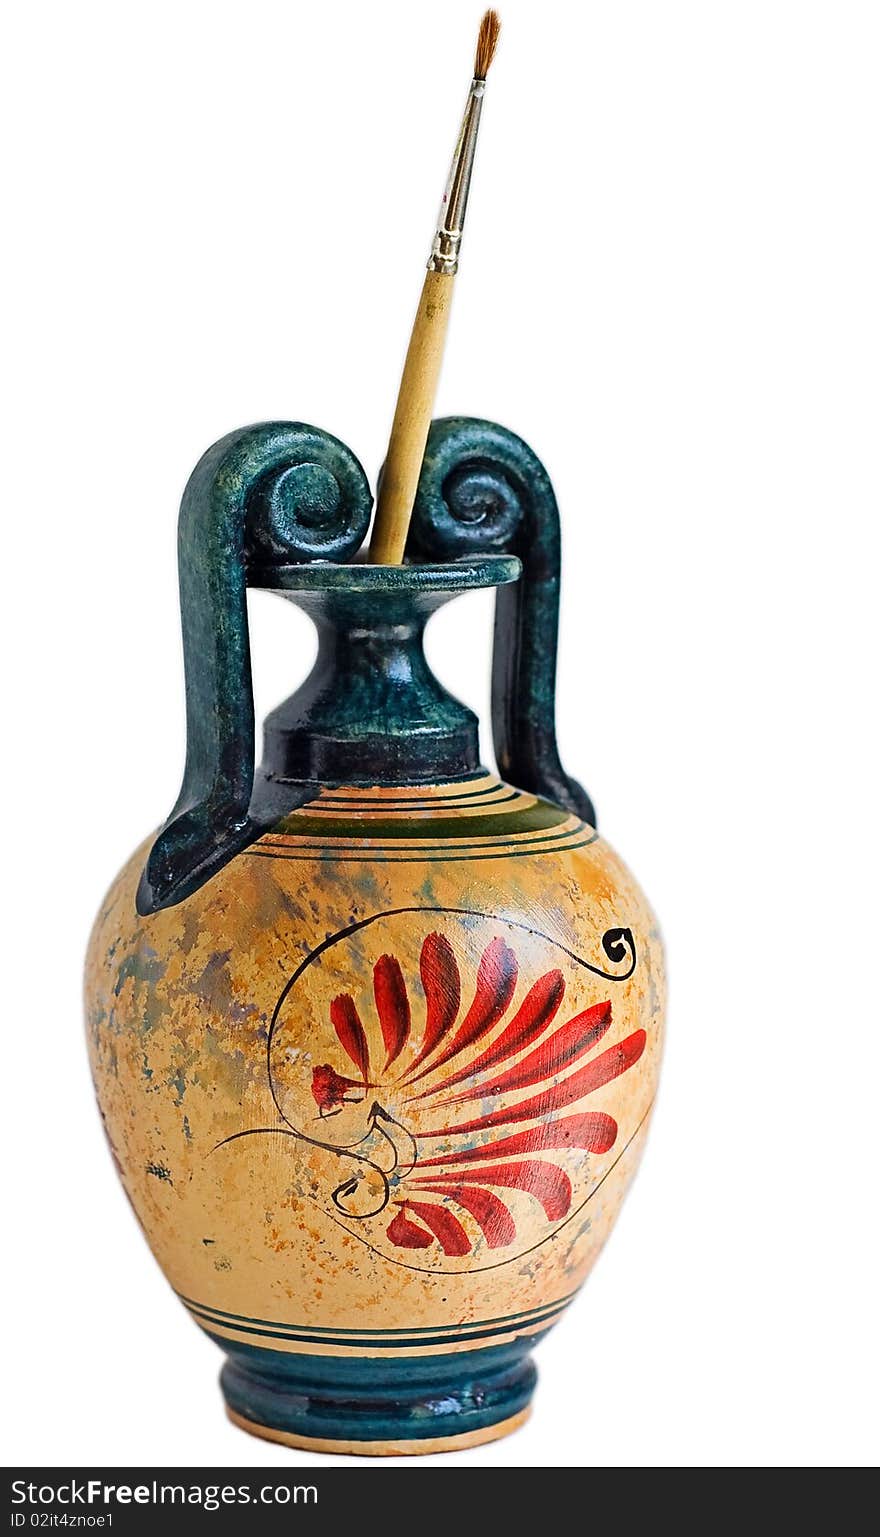 Replica of traditional greek vase with colorful red drawings and brush standing in it. Replica of traditional greek vase with colorful red drawings and brush standing in it